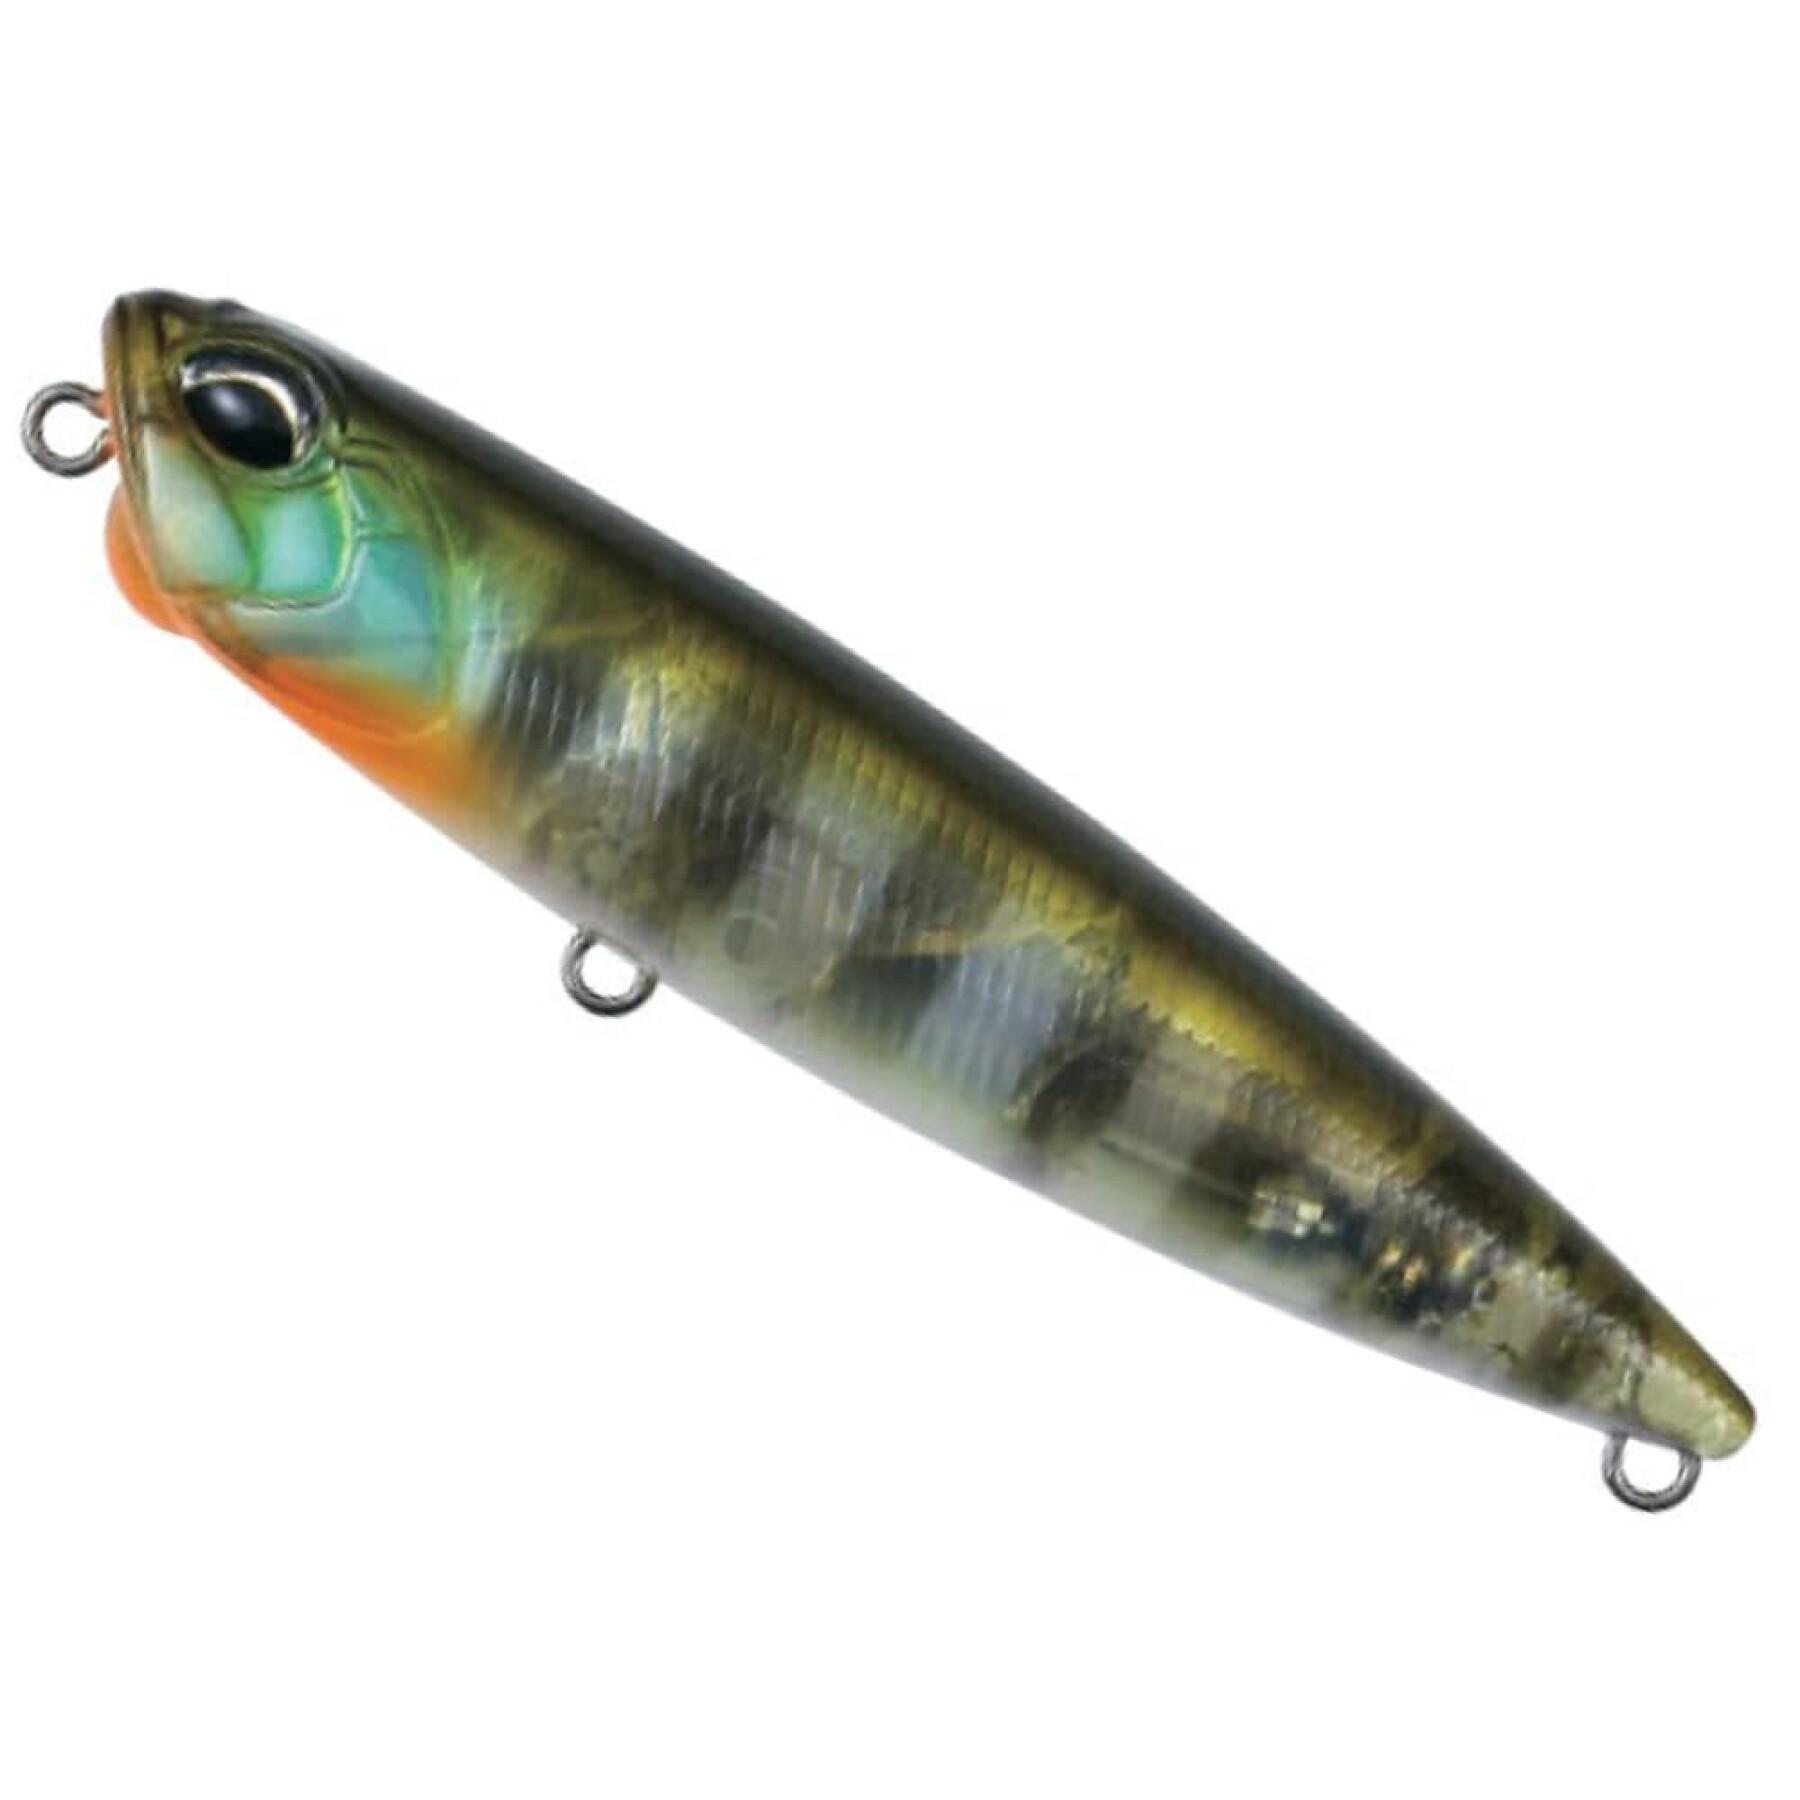 Lure Duo Pencil 65 Fw 5,5g